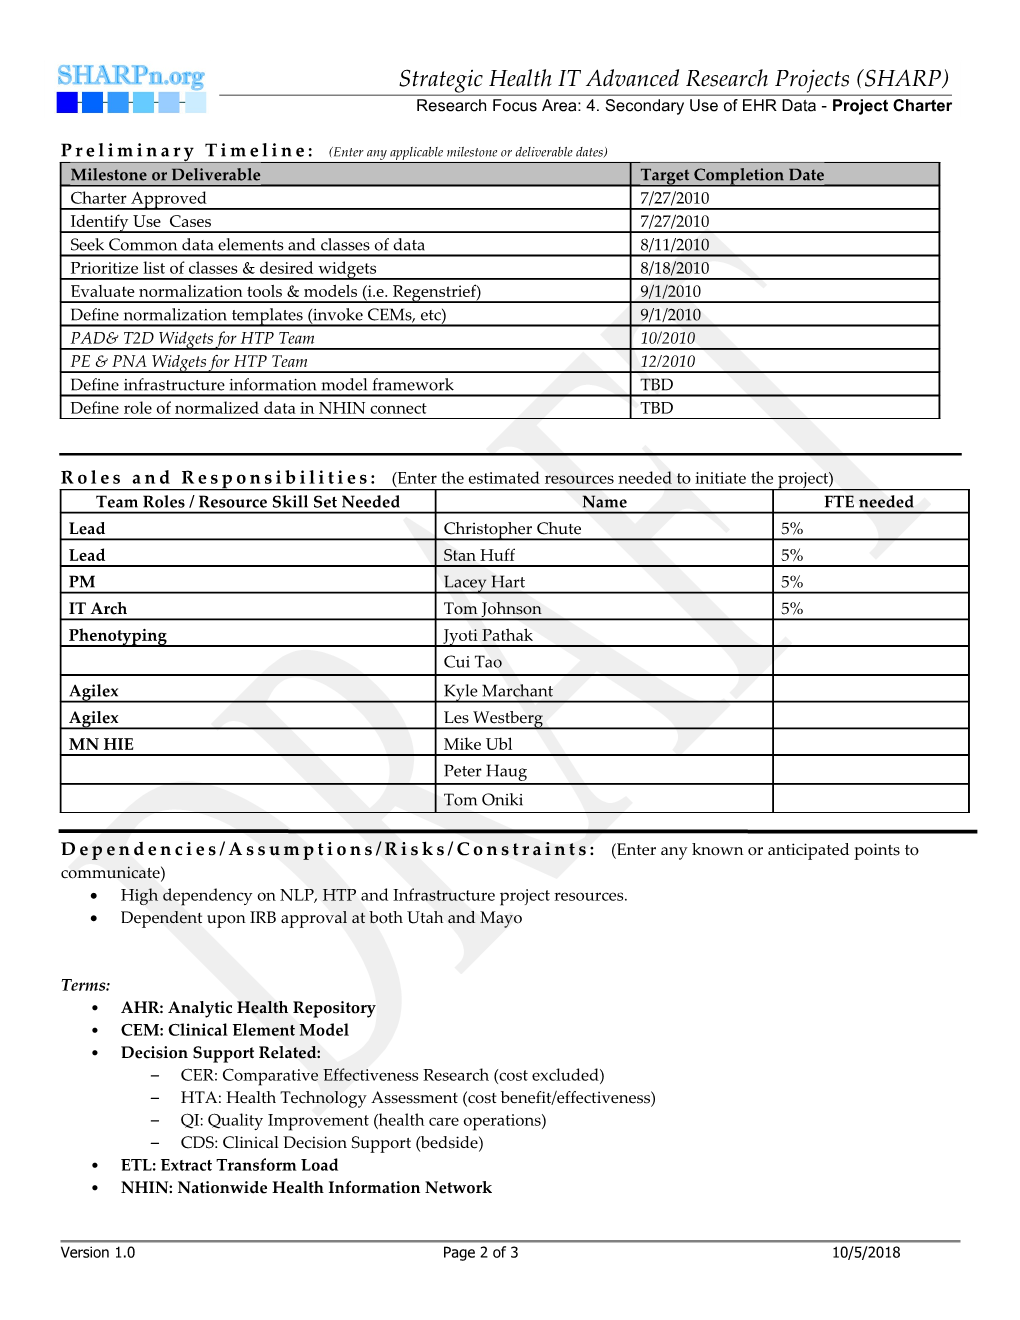 Project Proposal Summary Template